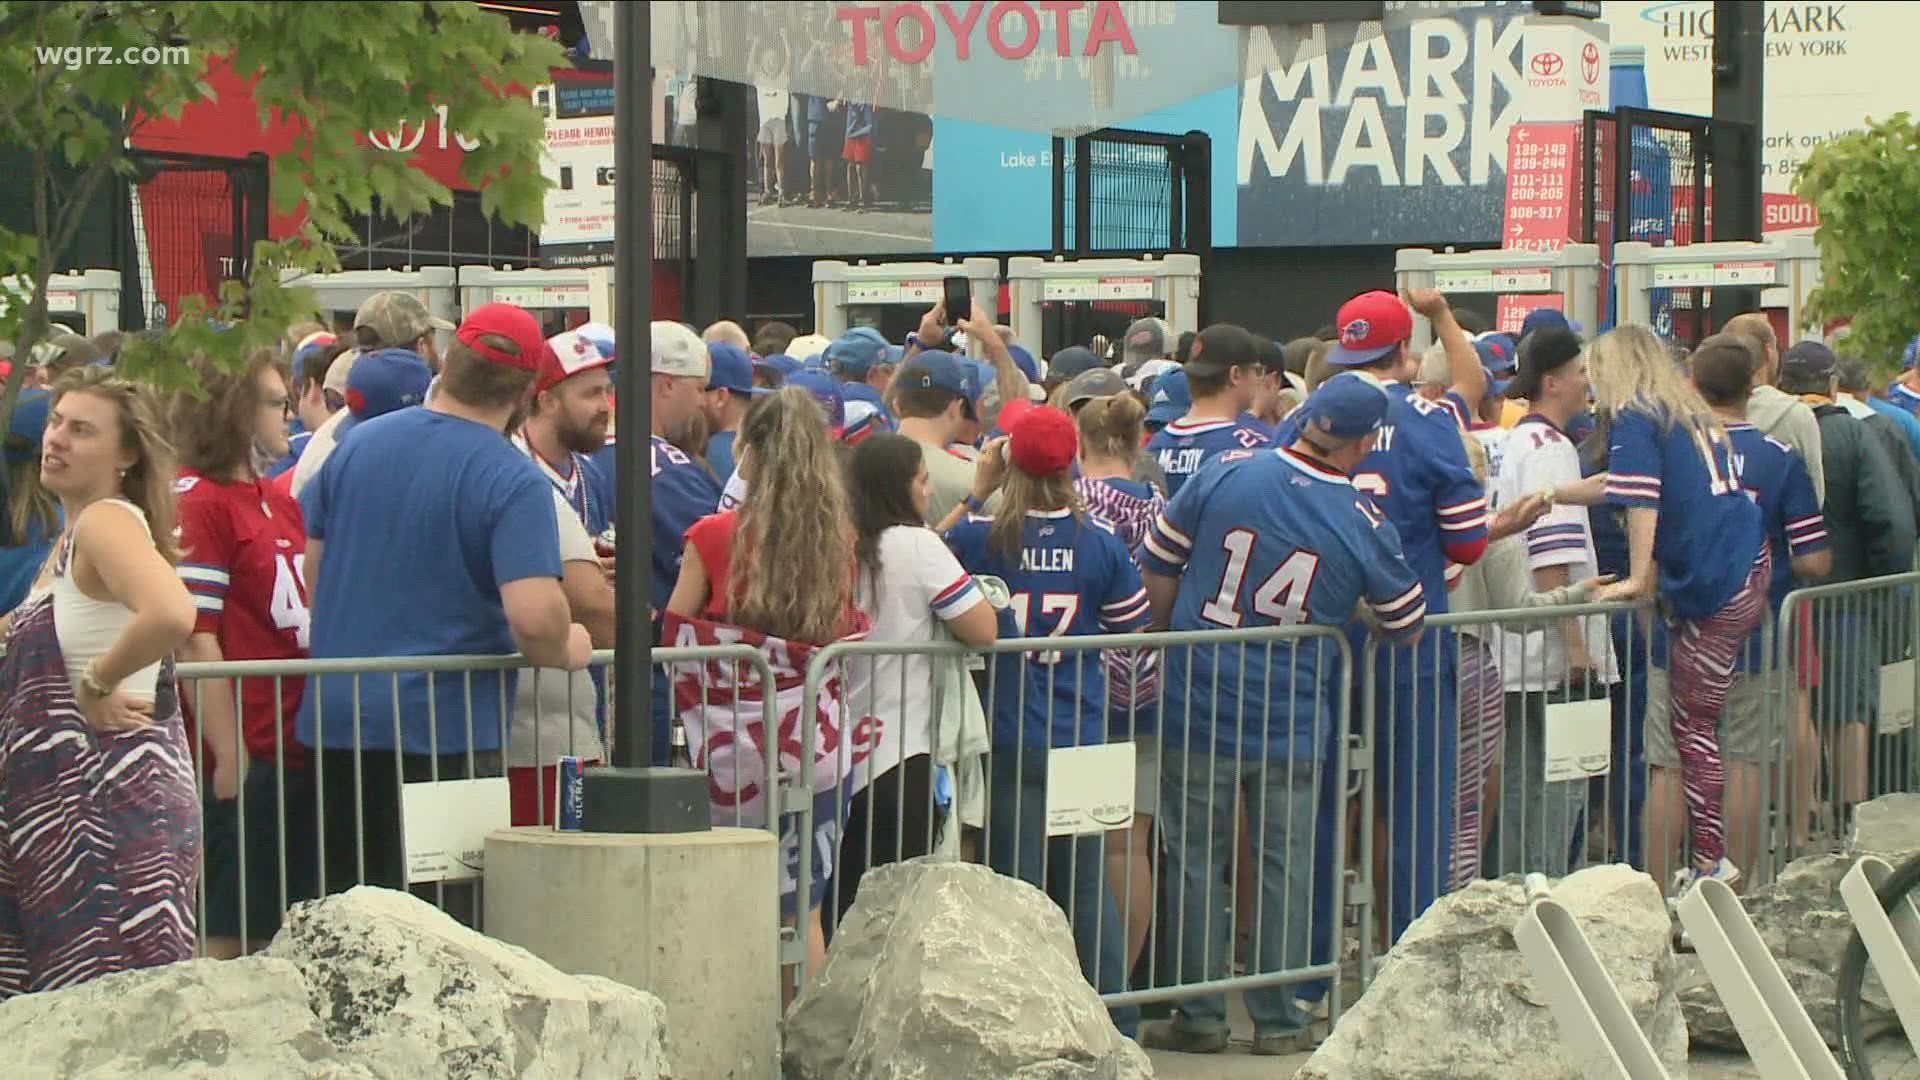 Commercial casting call for bills fans